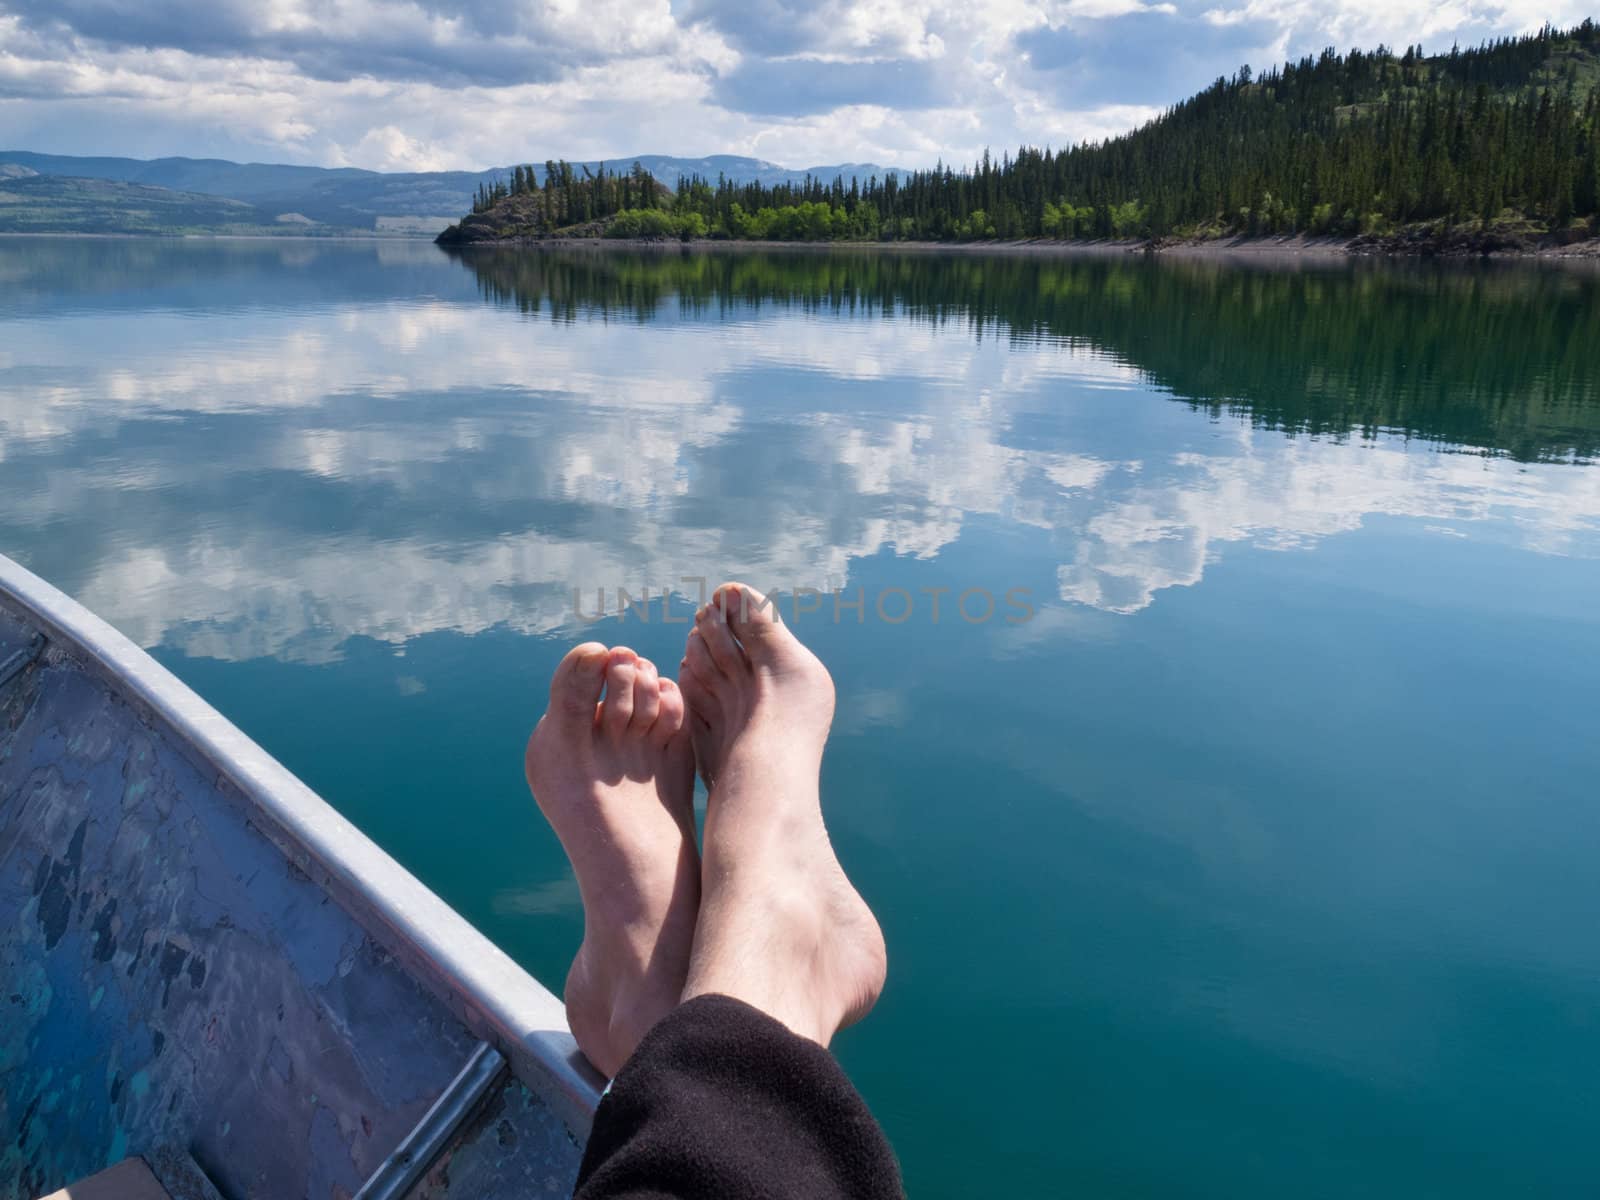 Relaxing on Lake Laberge, Yukon Territory, Canada by PiLens